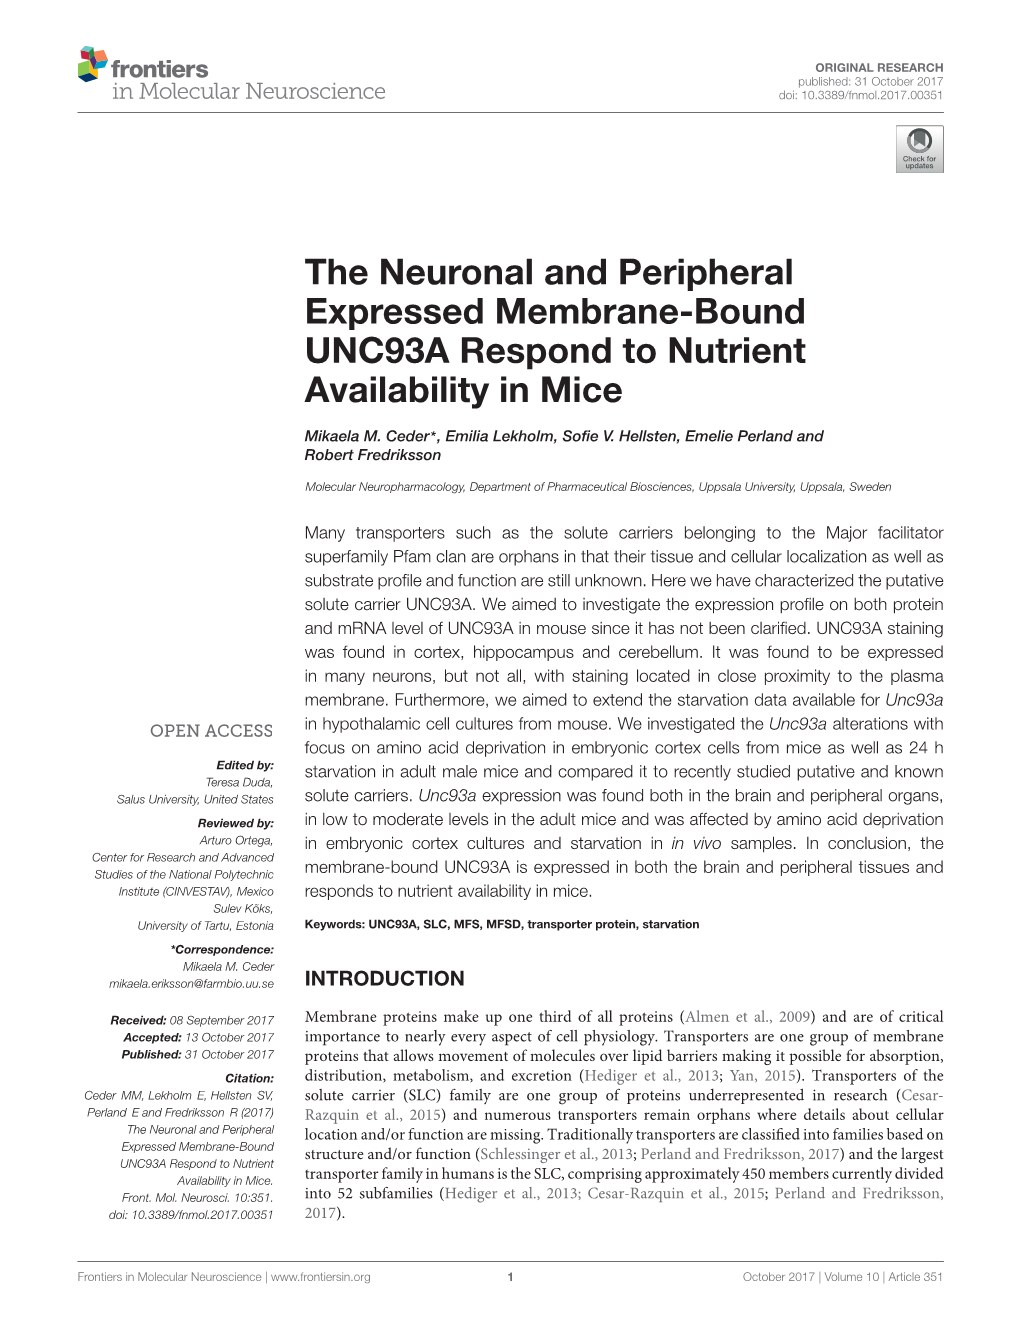 The Neuronal and Peripheral Expressed Membrane-Bound UNC93A Respond to Nutrient Availability in Mice